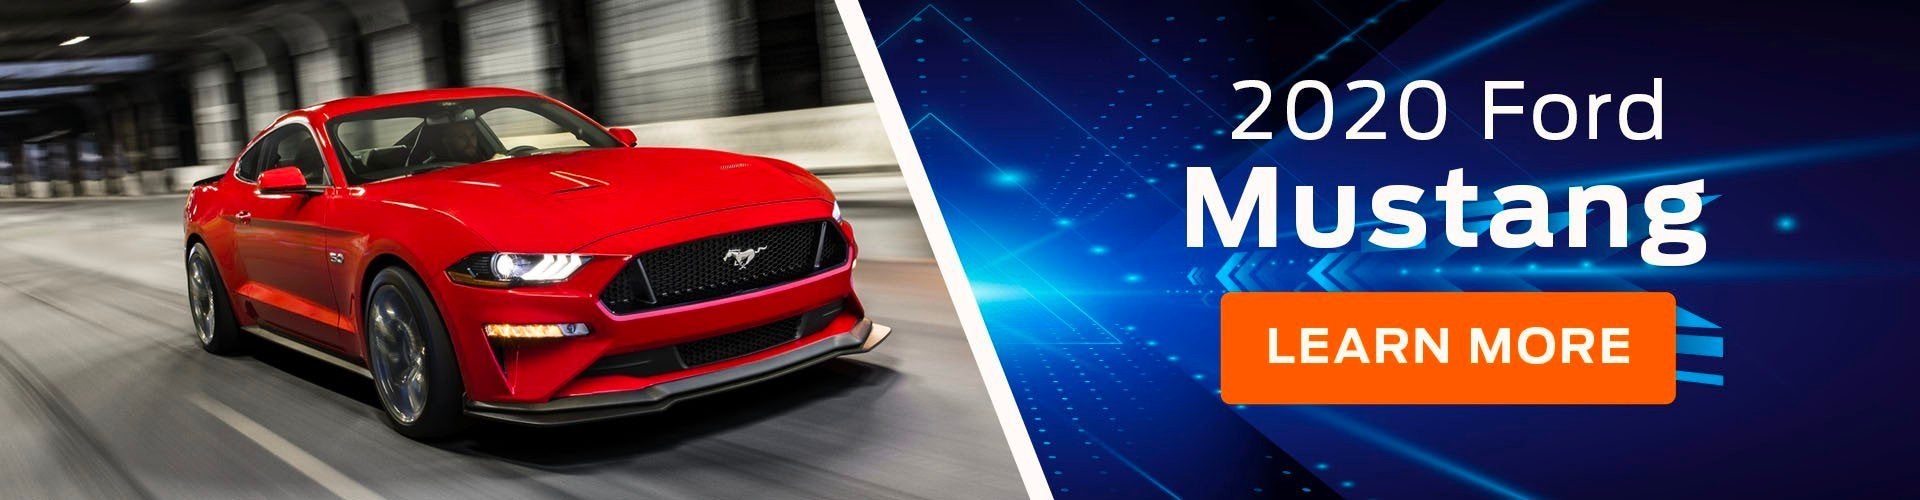 2020 Ford Mustang: Learn More